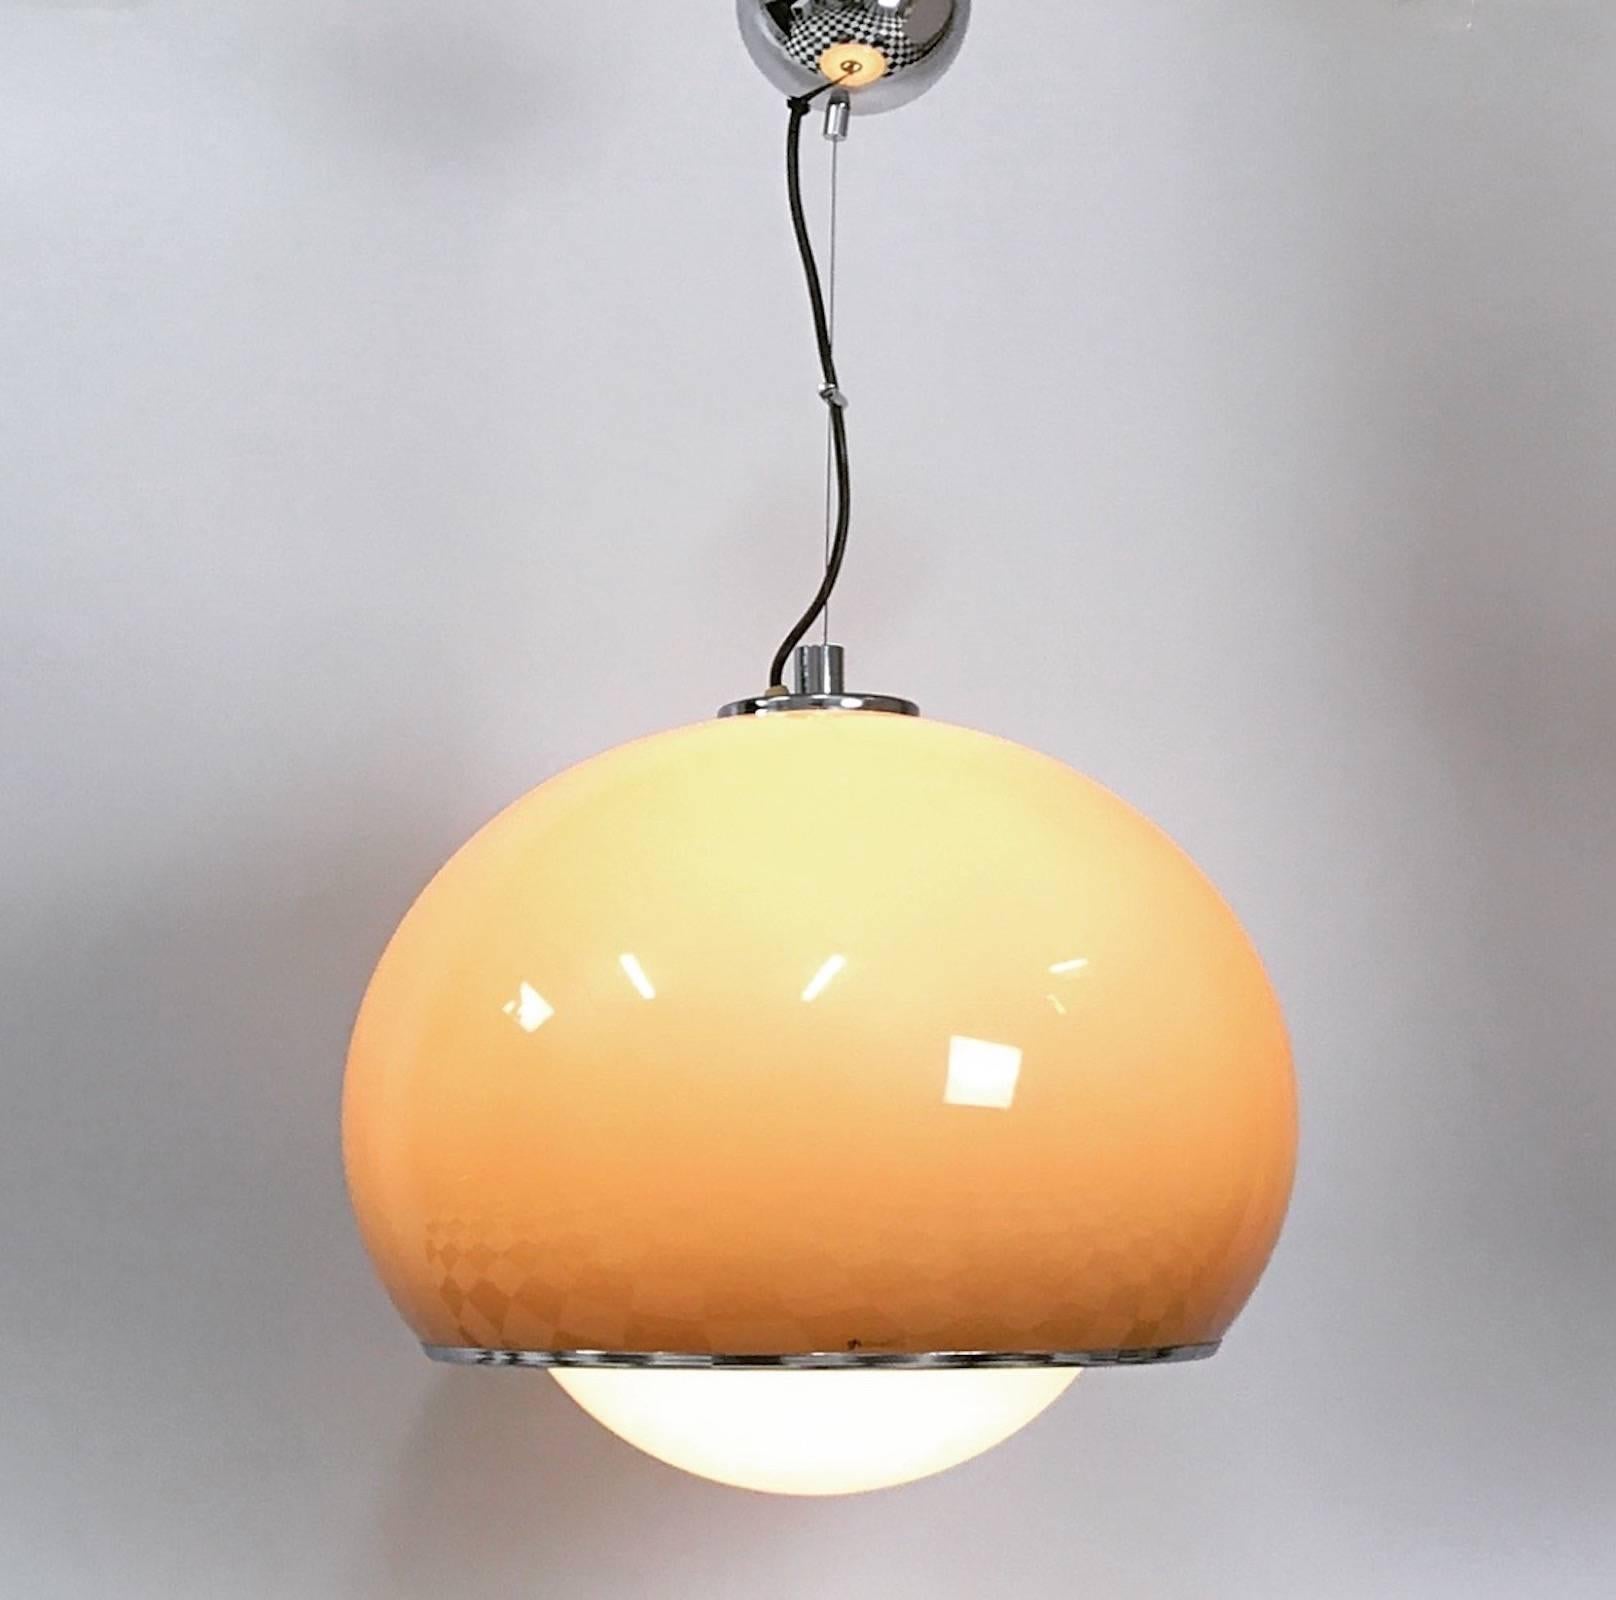 Mid-Century Modern Grande Bud Ceiling Light by Meblo for Guzzini Italy, Late 1960s